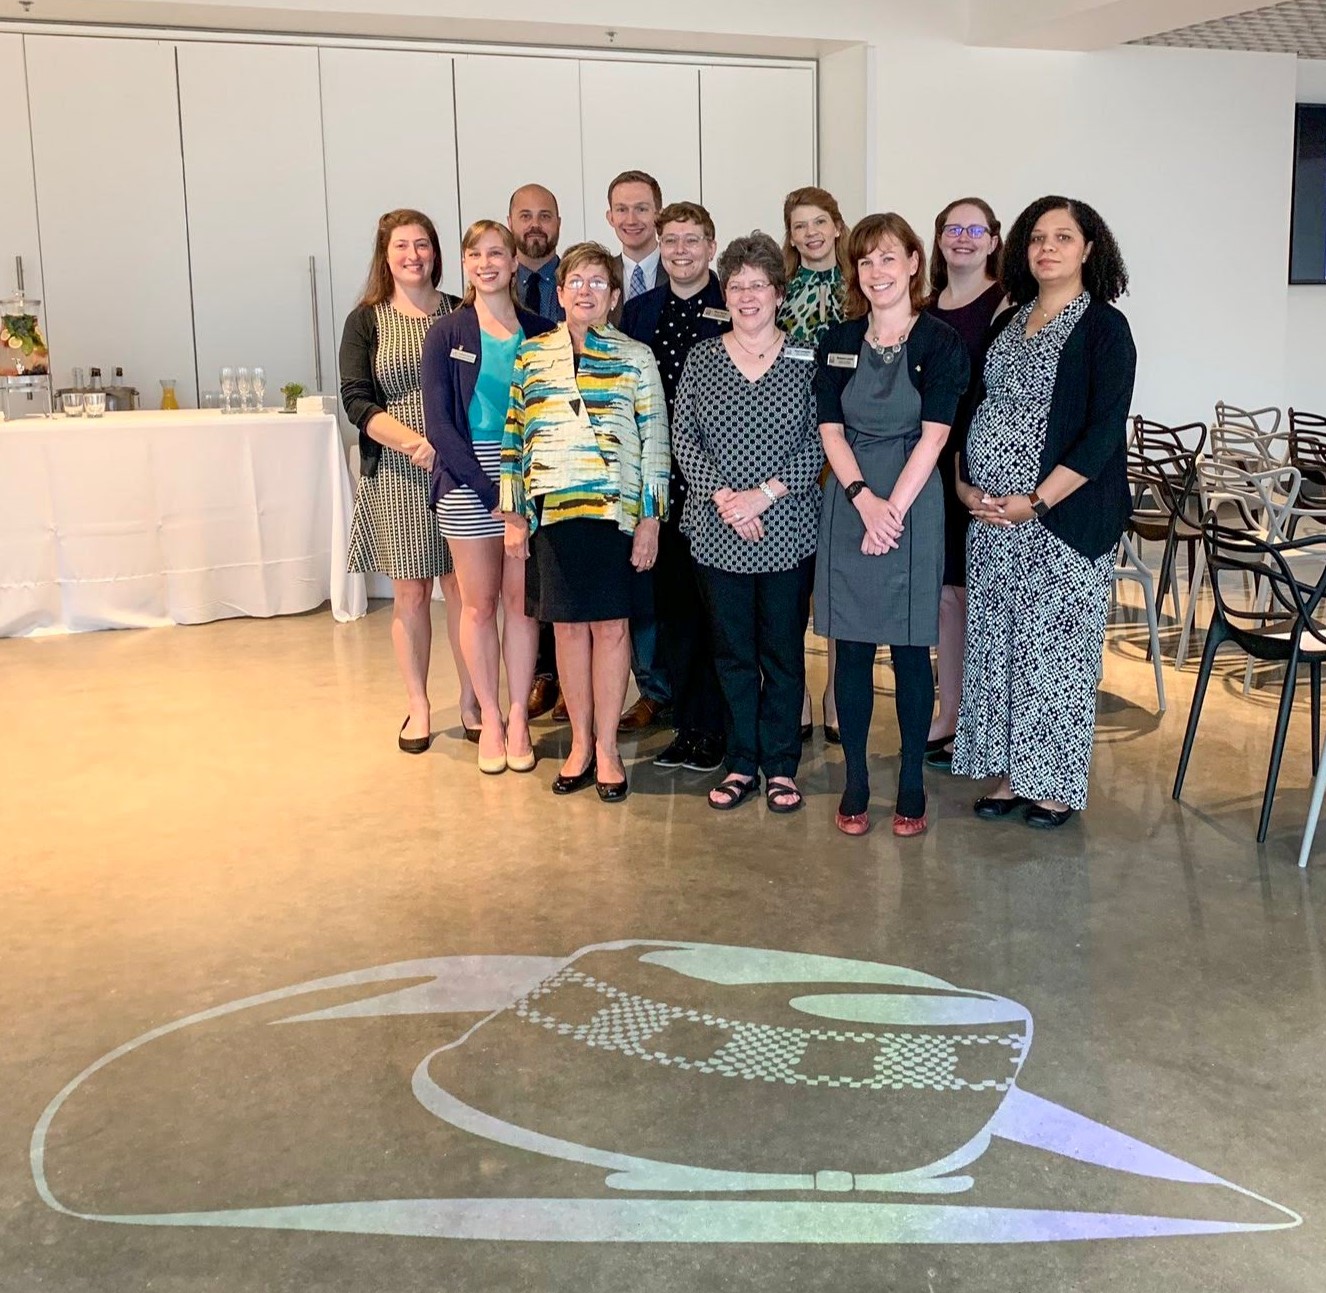 Group photograph of the staff and graduate assistants of CAHC. On the floor in front of them is a projected image of Winthrop Rockefeller's hat.